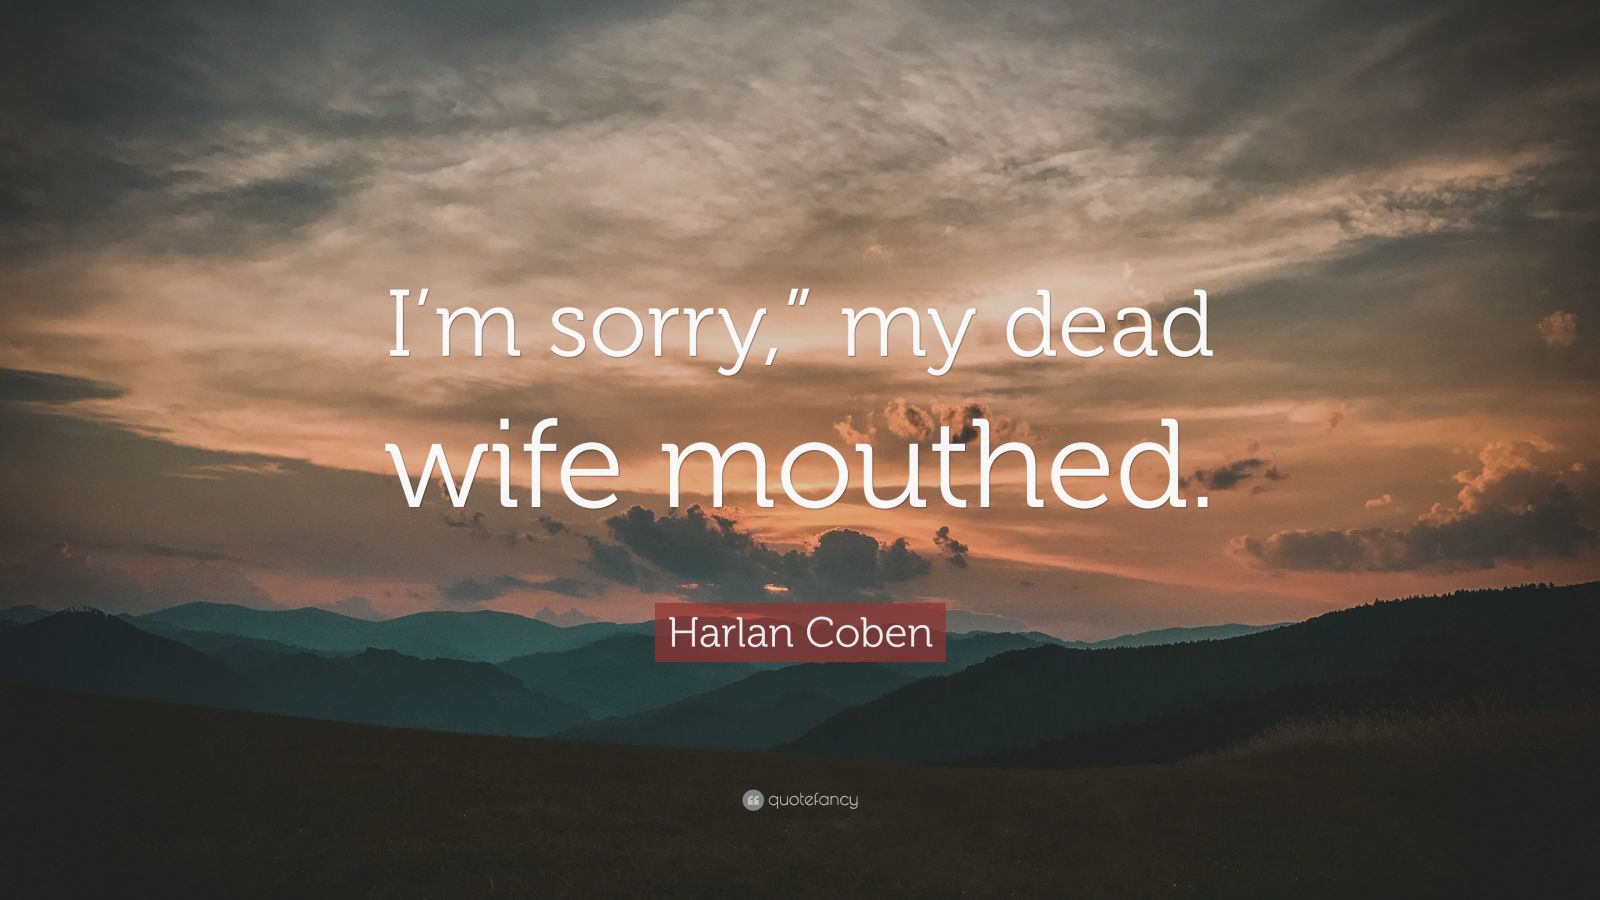 Harlan Coben Quote: “I'm sorry,” my dead wife mouthed.”